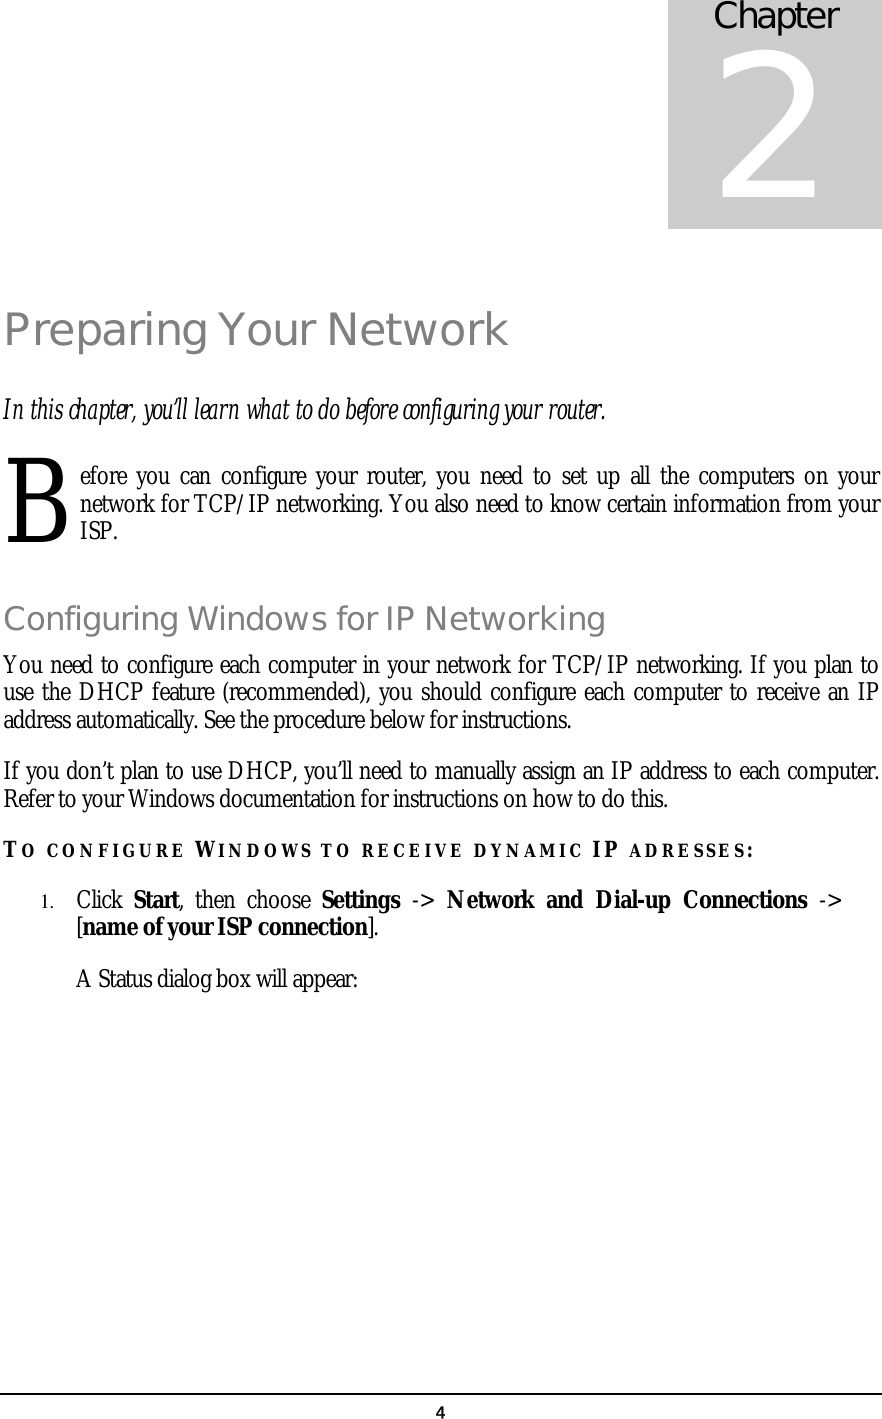   4Preparing Your Network In this chapter, you’ll learn what to do before configuring your router. efore you can configure your router, you need to set up all the computers on your network for TCP/IP networking. You also need to know certain information from your ISP. Configuring Windows for IP Networking You need to configure each computer in your network for TCP/IP networking. If you plan to use the DHCP feature (recommended), you should configure each computer to receive an IP address automatically. See the procedure below for instructions. If you don’t plan to use DHCP, you’ll need to manually assign an IP address to each computer. Refer to your Windows documentation for instructions on how to do this. TO CONFIGURE WINDOWS TO RECEIVE DYNAMIC IP ADRESSES: 1.  Click  Start, then choose Settings  -&gt;  Network and Dial-up Connections -&gt; [name of your ISP connection].   A Status dialog box will appear:  Chapter 2 B 